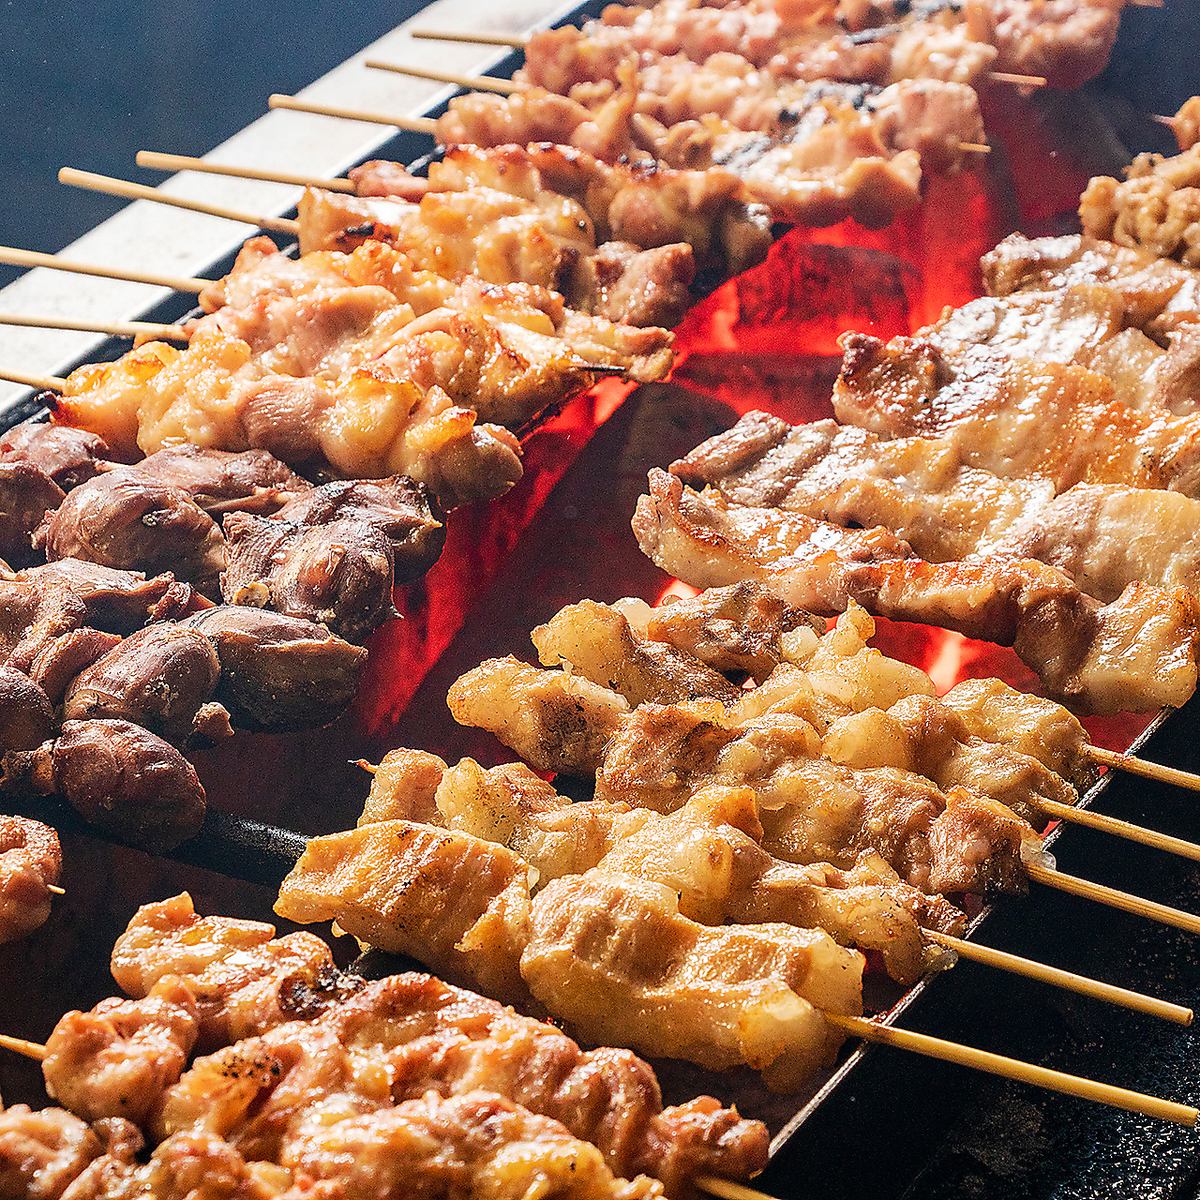 A lot of exquisite skewers and Fukuoka specialties! Perfect for banquets!